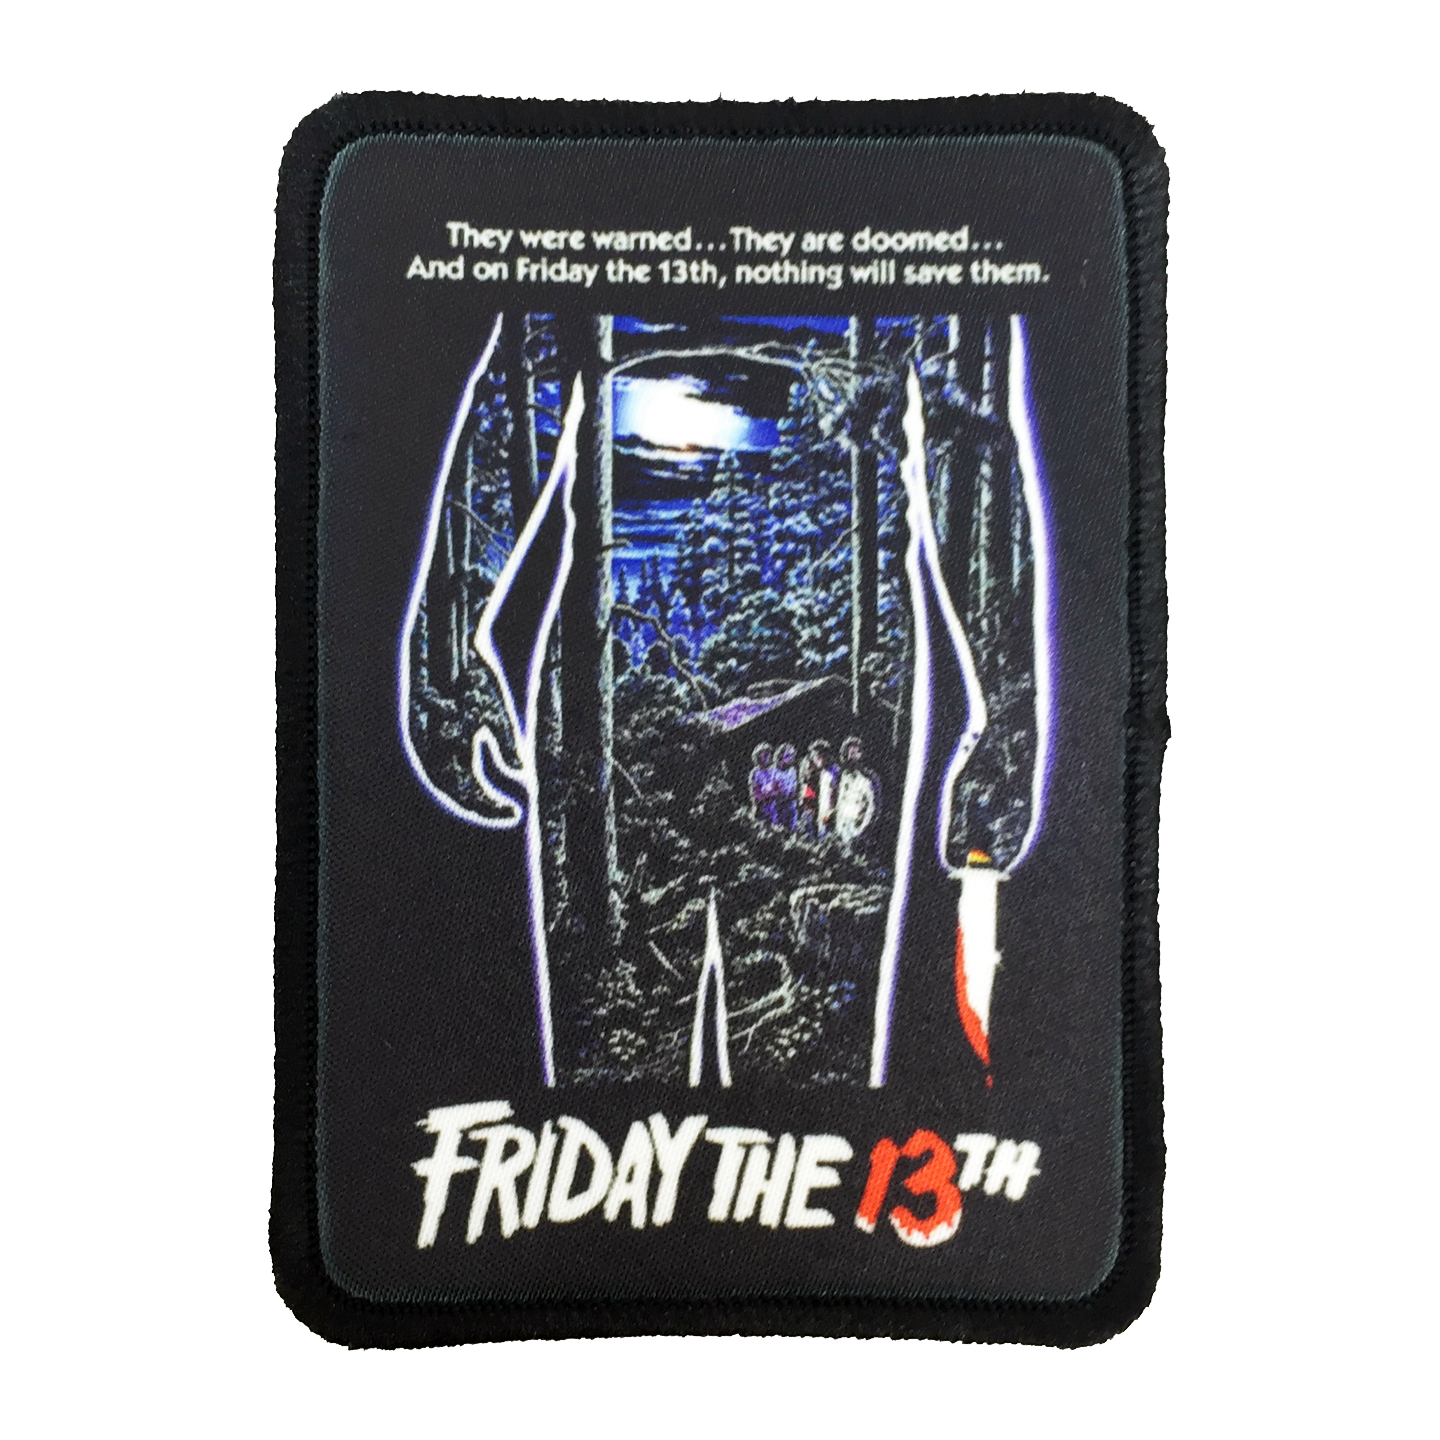 Friday the 13th Iron-On Patch - UNMASKED Horror & Punk Patches and Decor